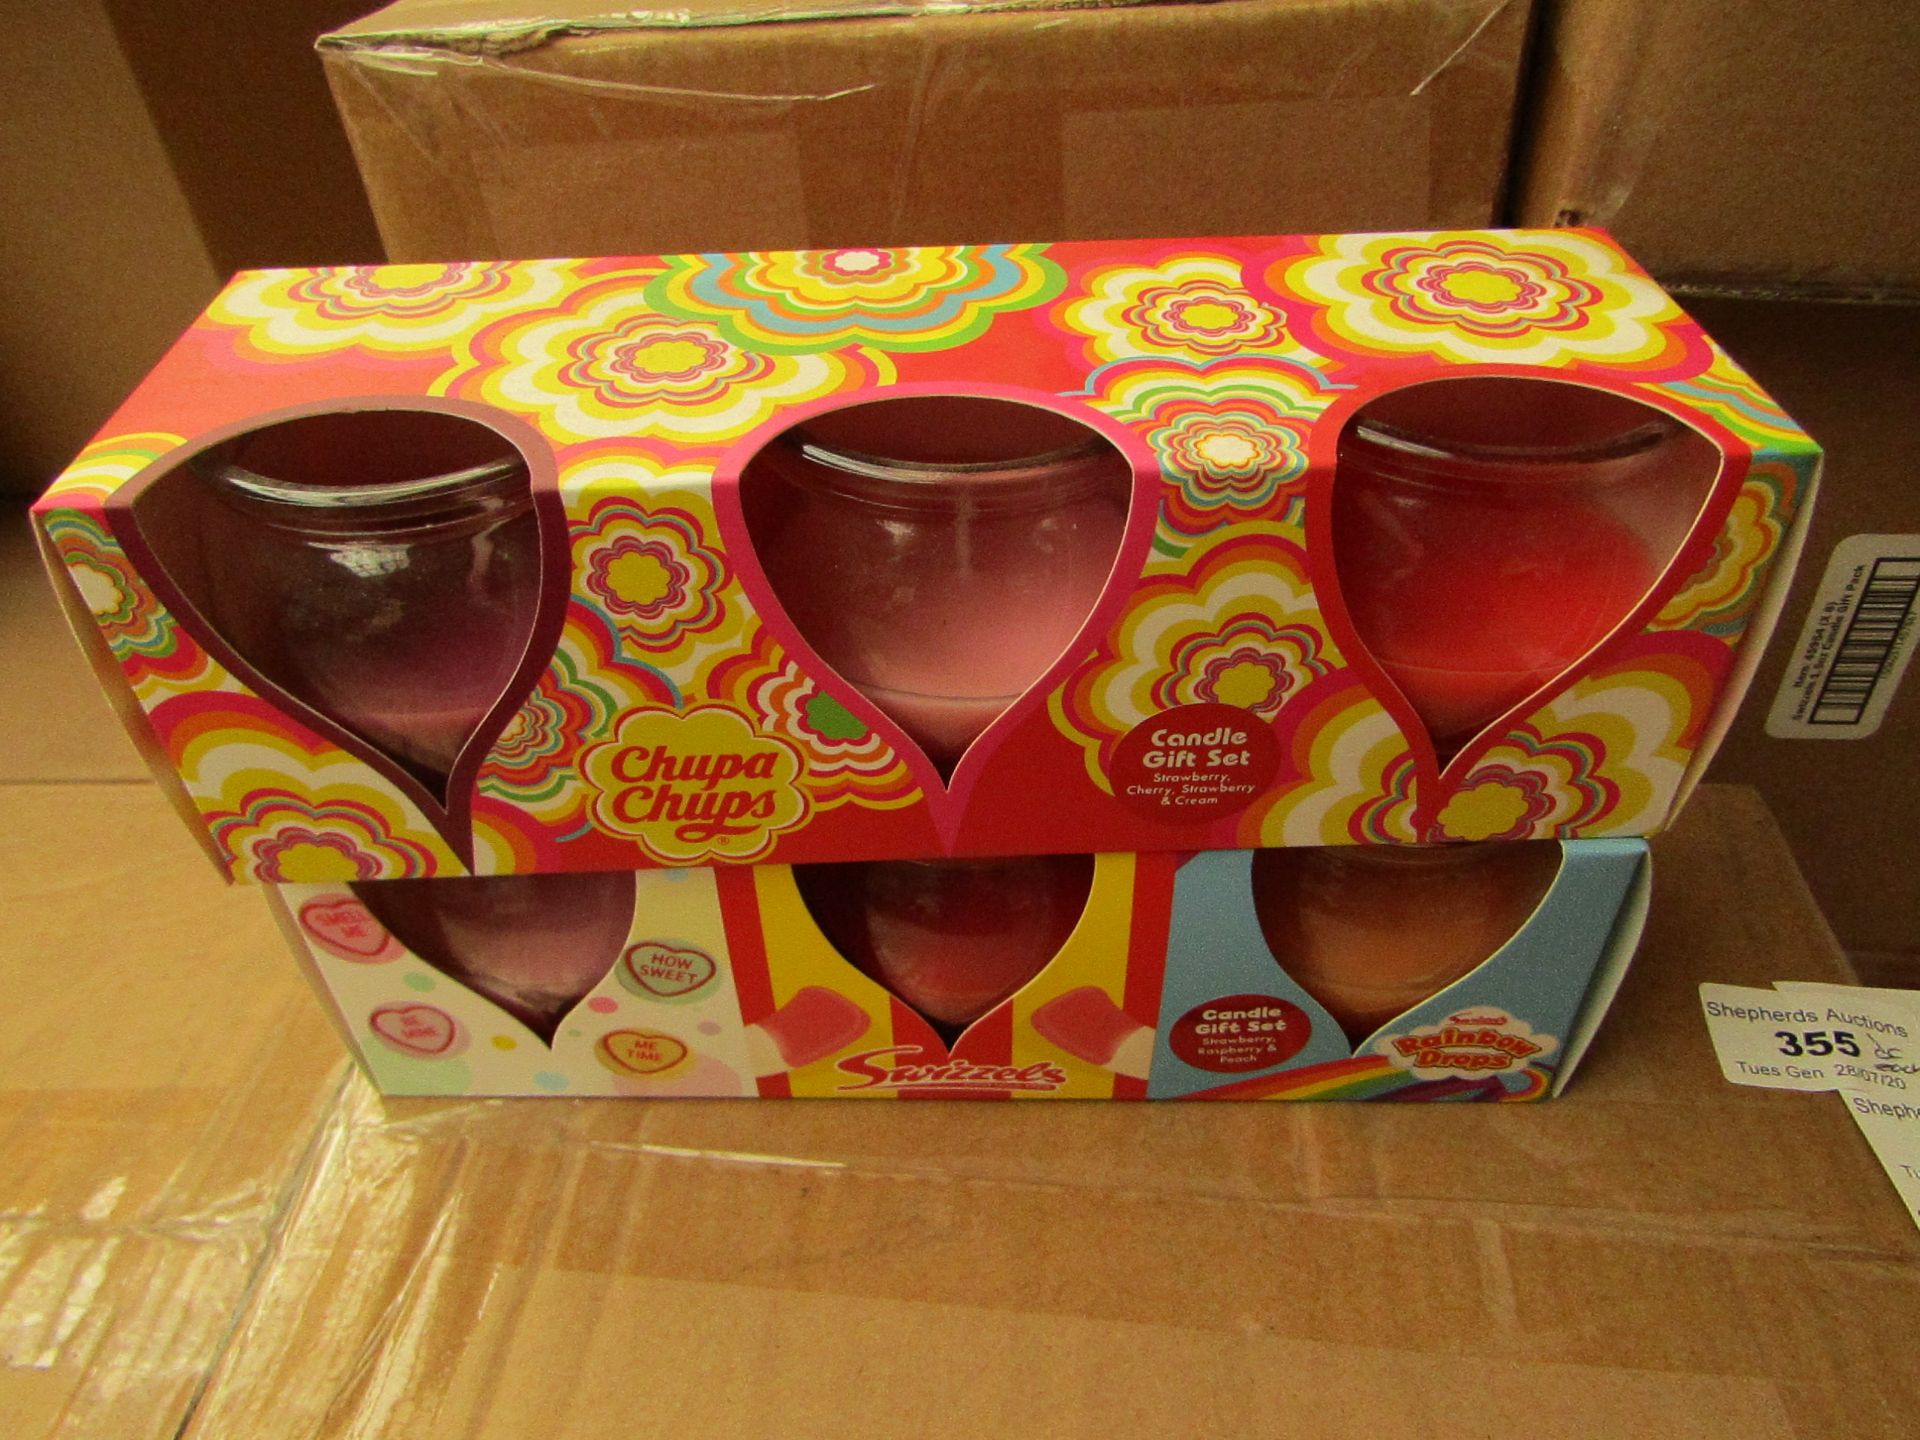 2 Packs of 3 Candles. 3 Being Swizzles & 3 Being Chupa Chups. New & Packaged